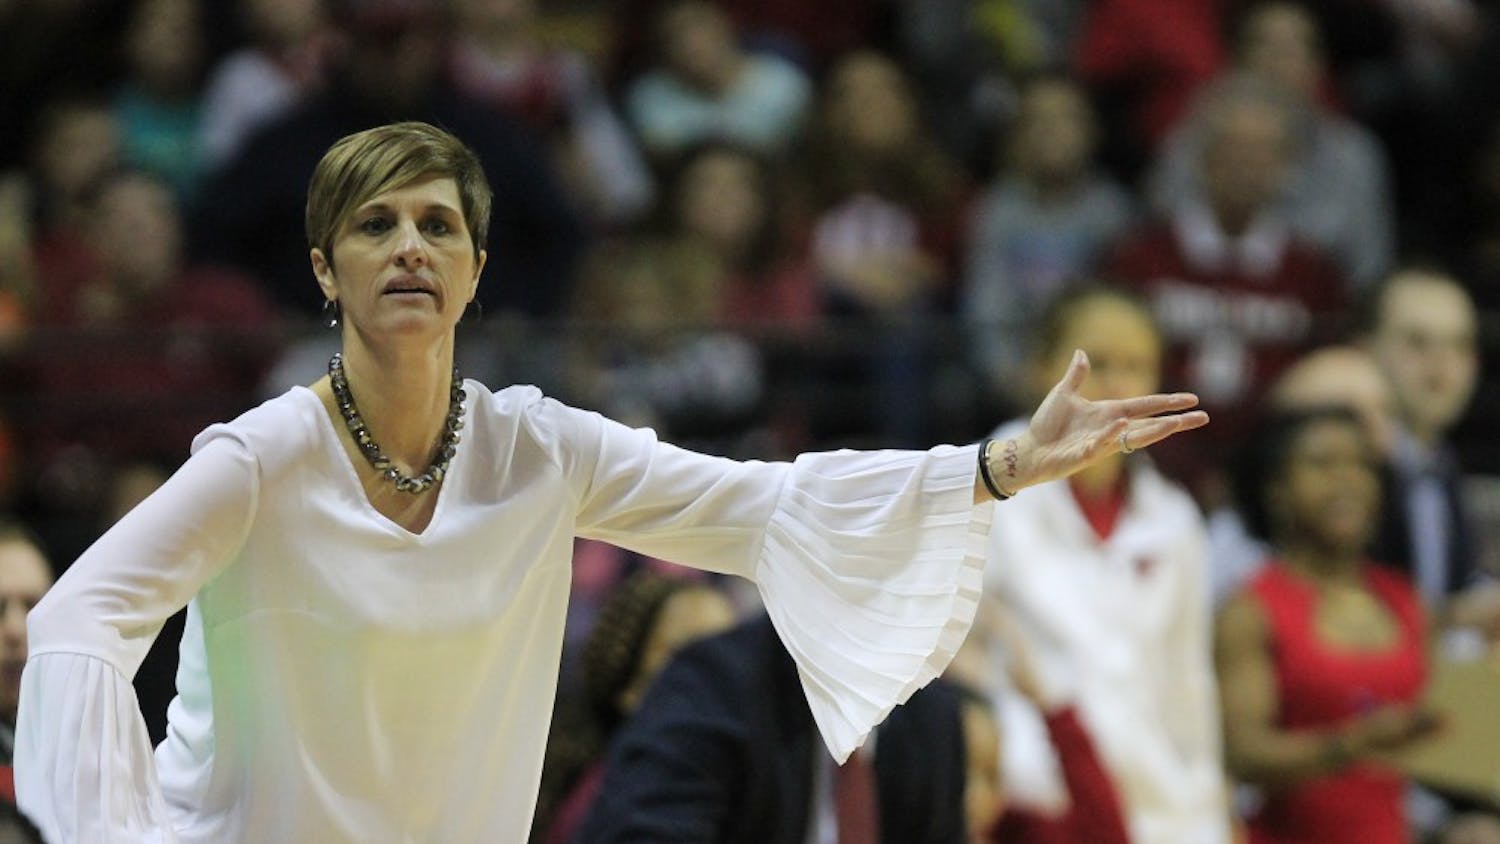 Women's basketball coach Teri Moren calling out to her players during the game against Purdue on Jan. 6 at Simon Skjodt Assembly Hall. The Hoosiers lost to No. 23 Michigan, 84-79.&nbsp;